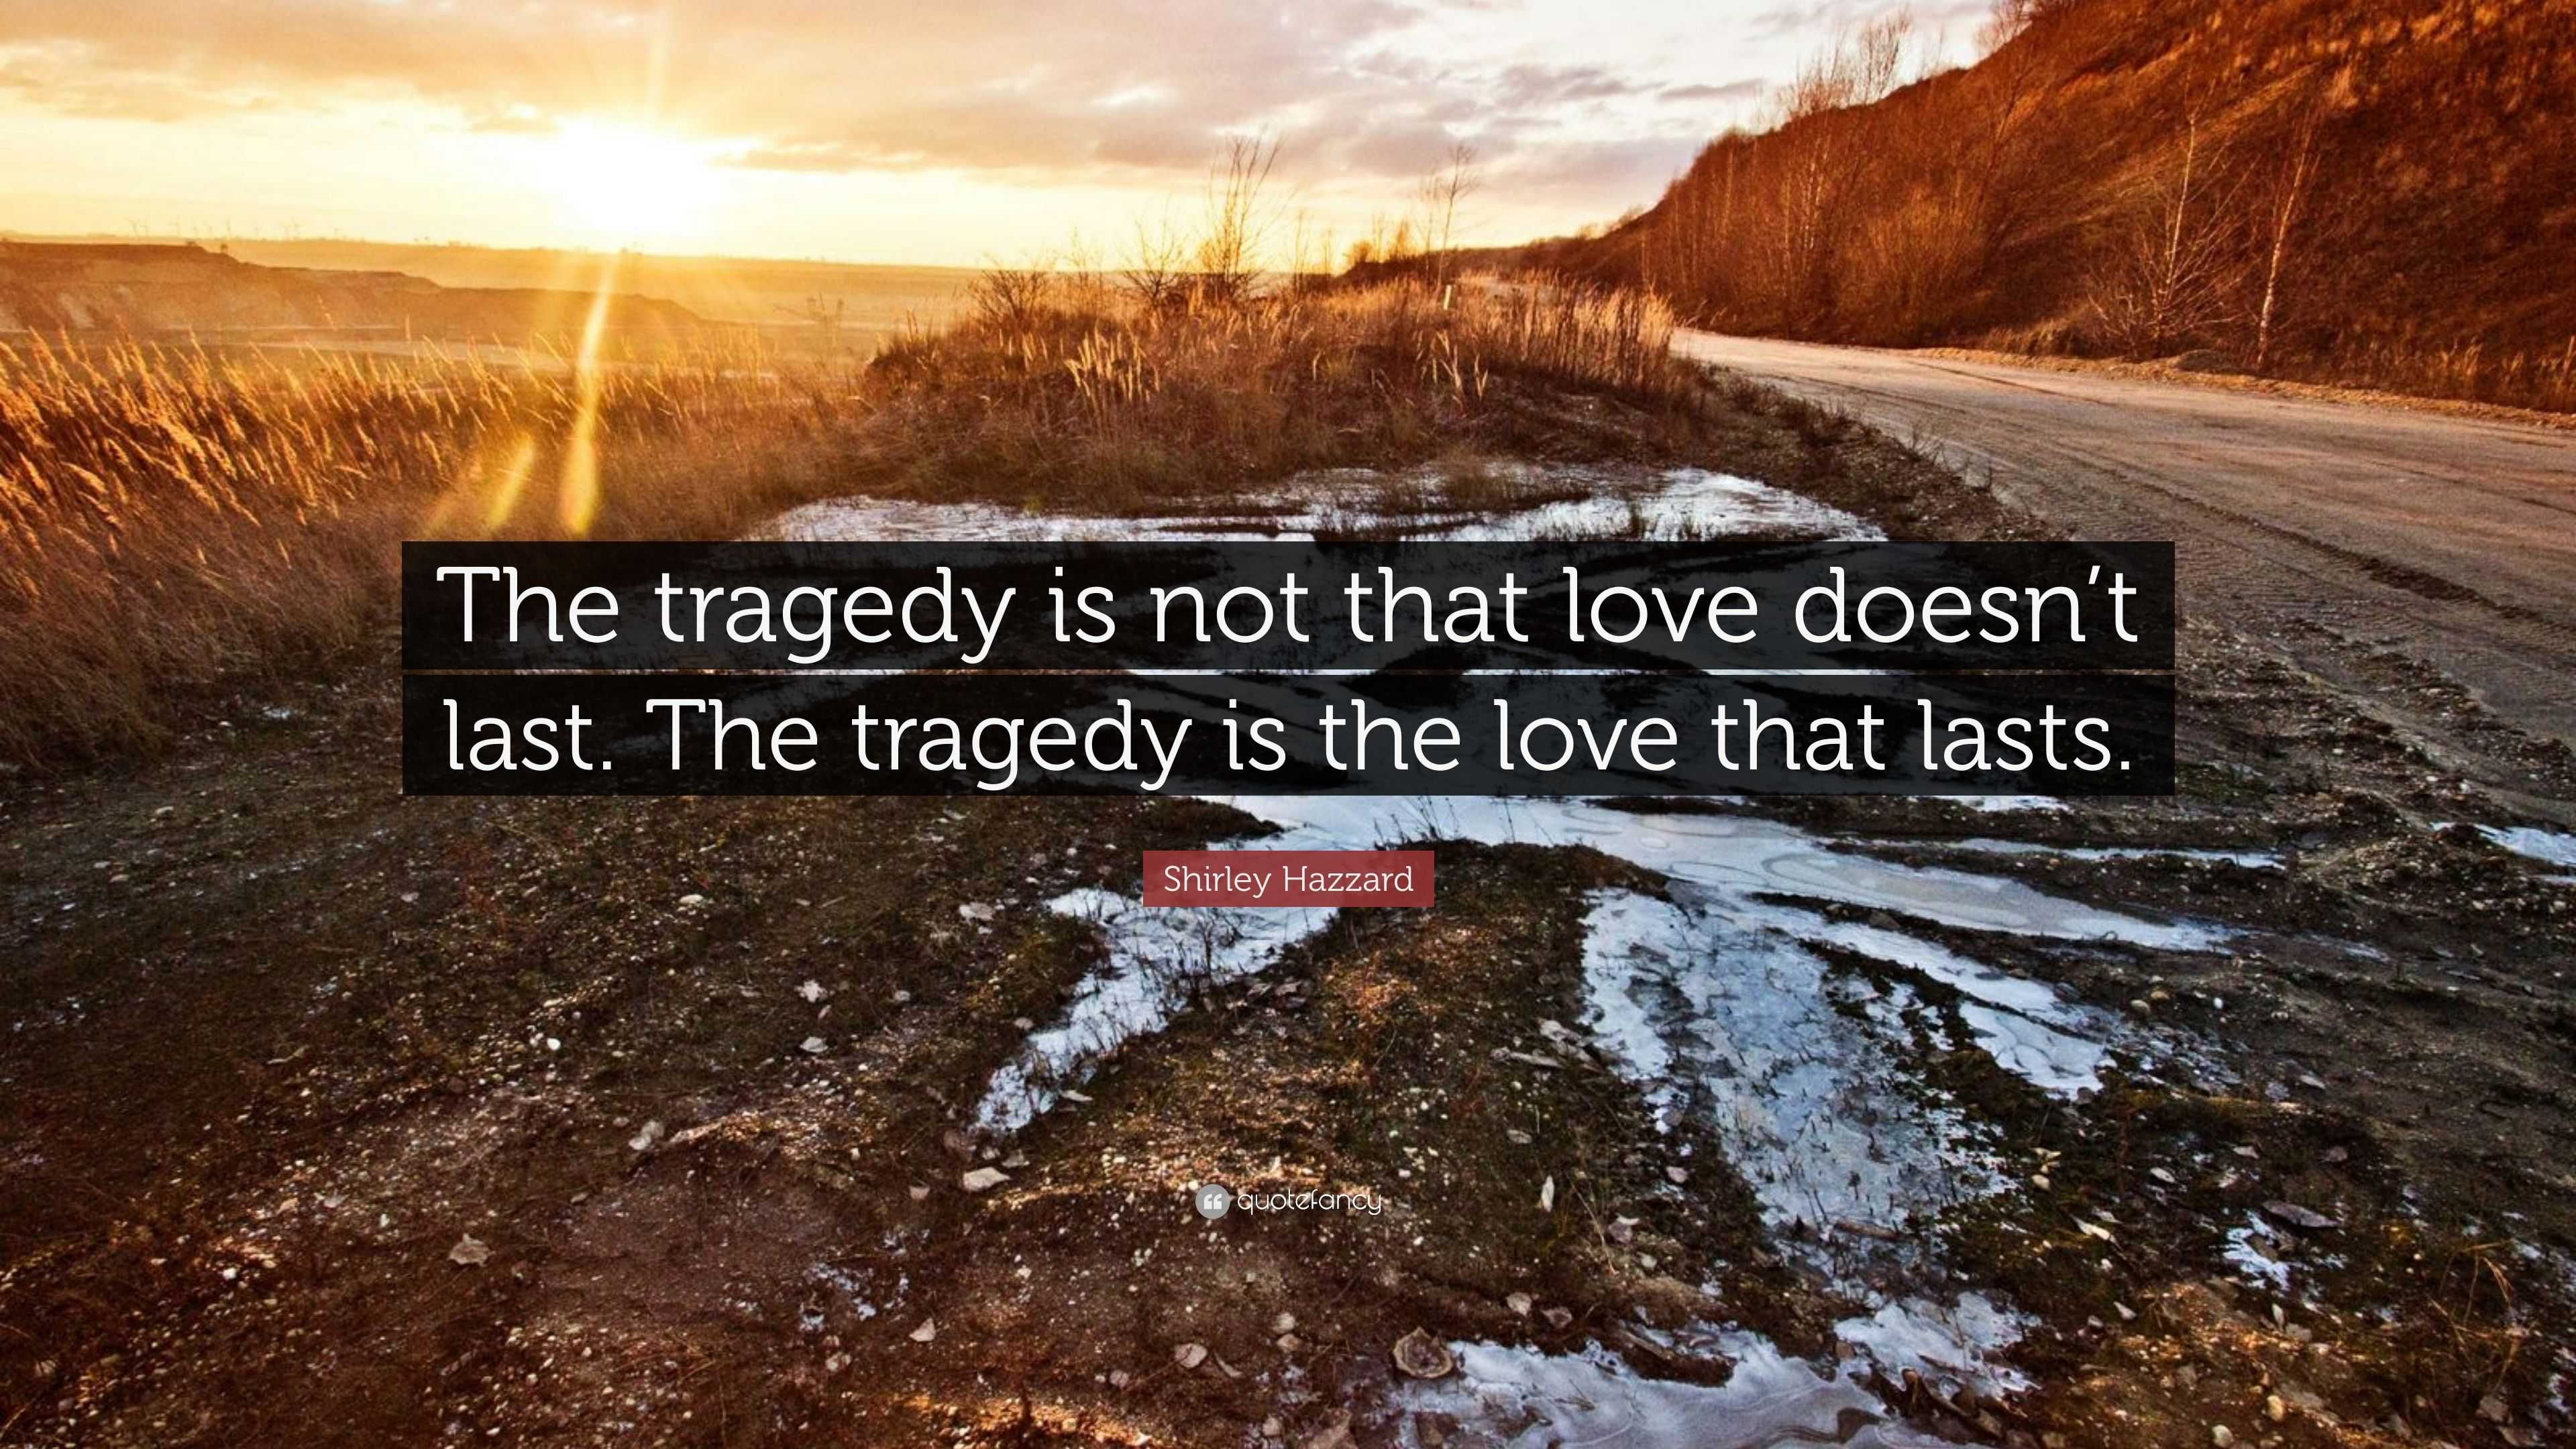 Shirley Hazzard Quote: “The tragedy is not that love doesn't last. The  tragedy is the